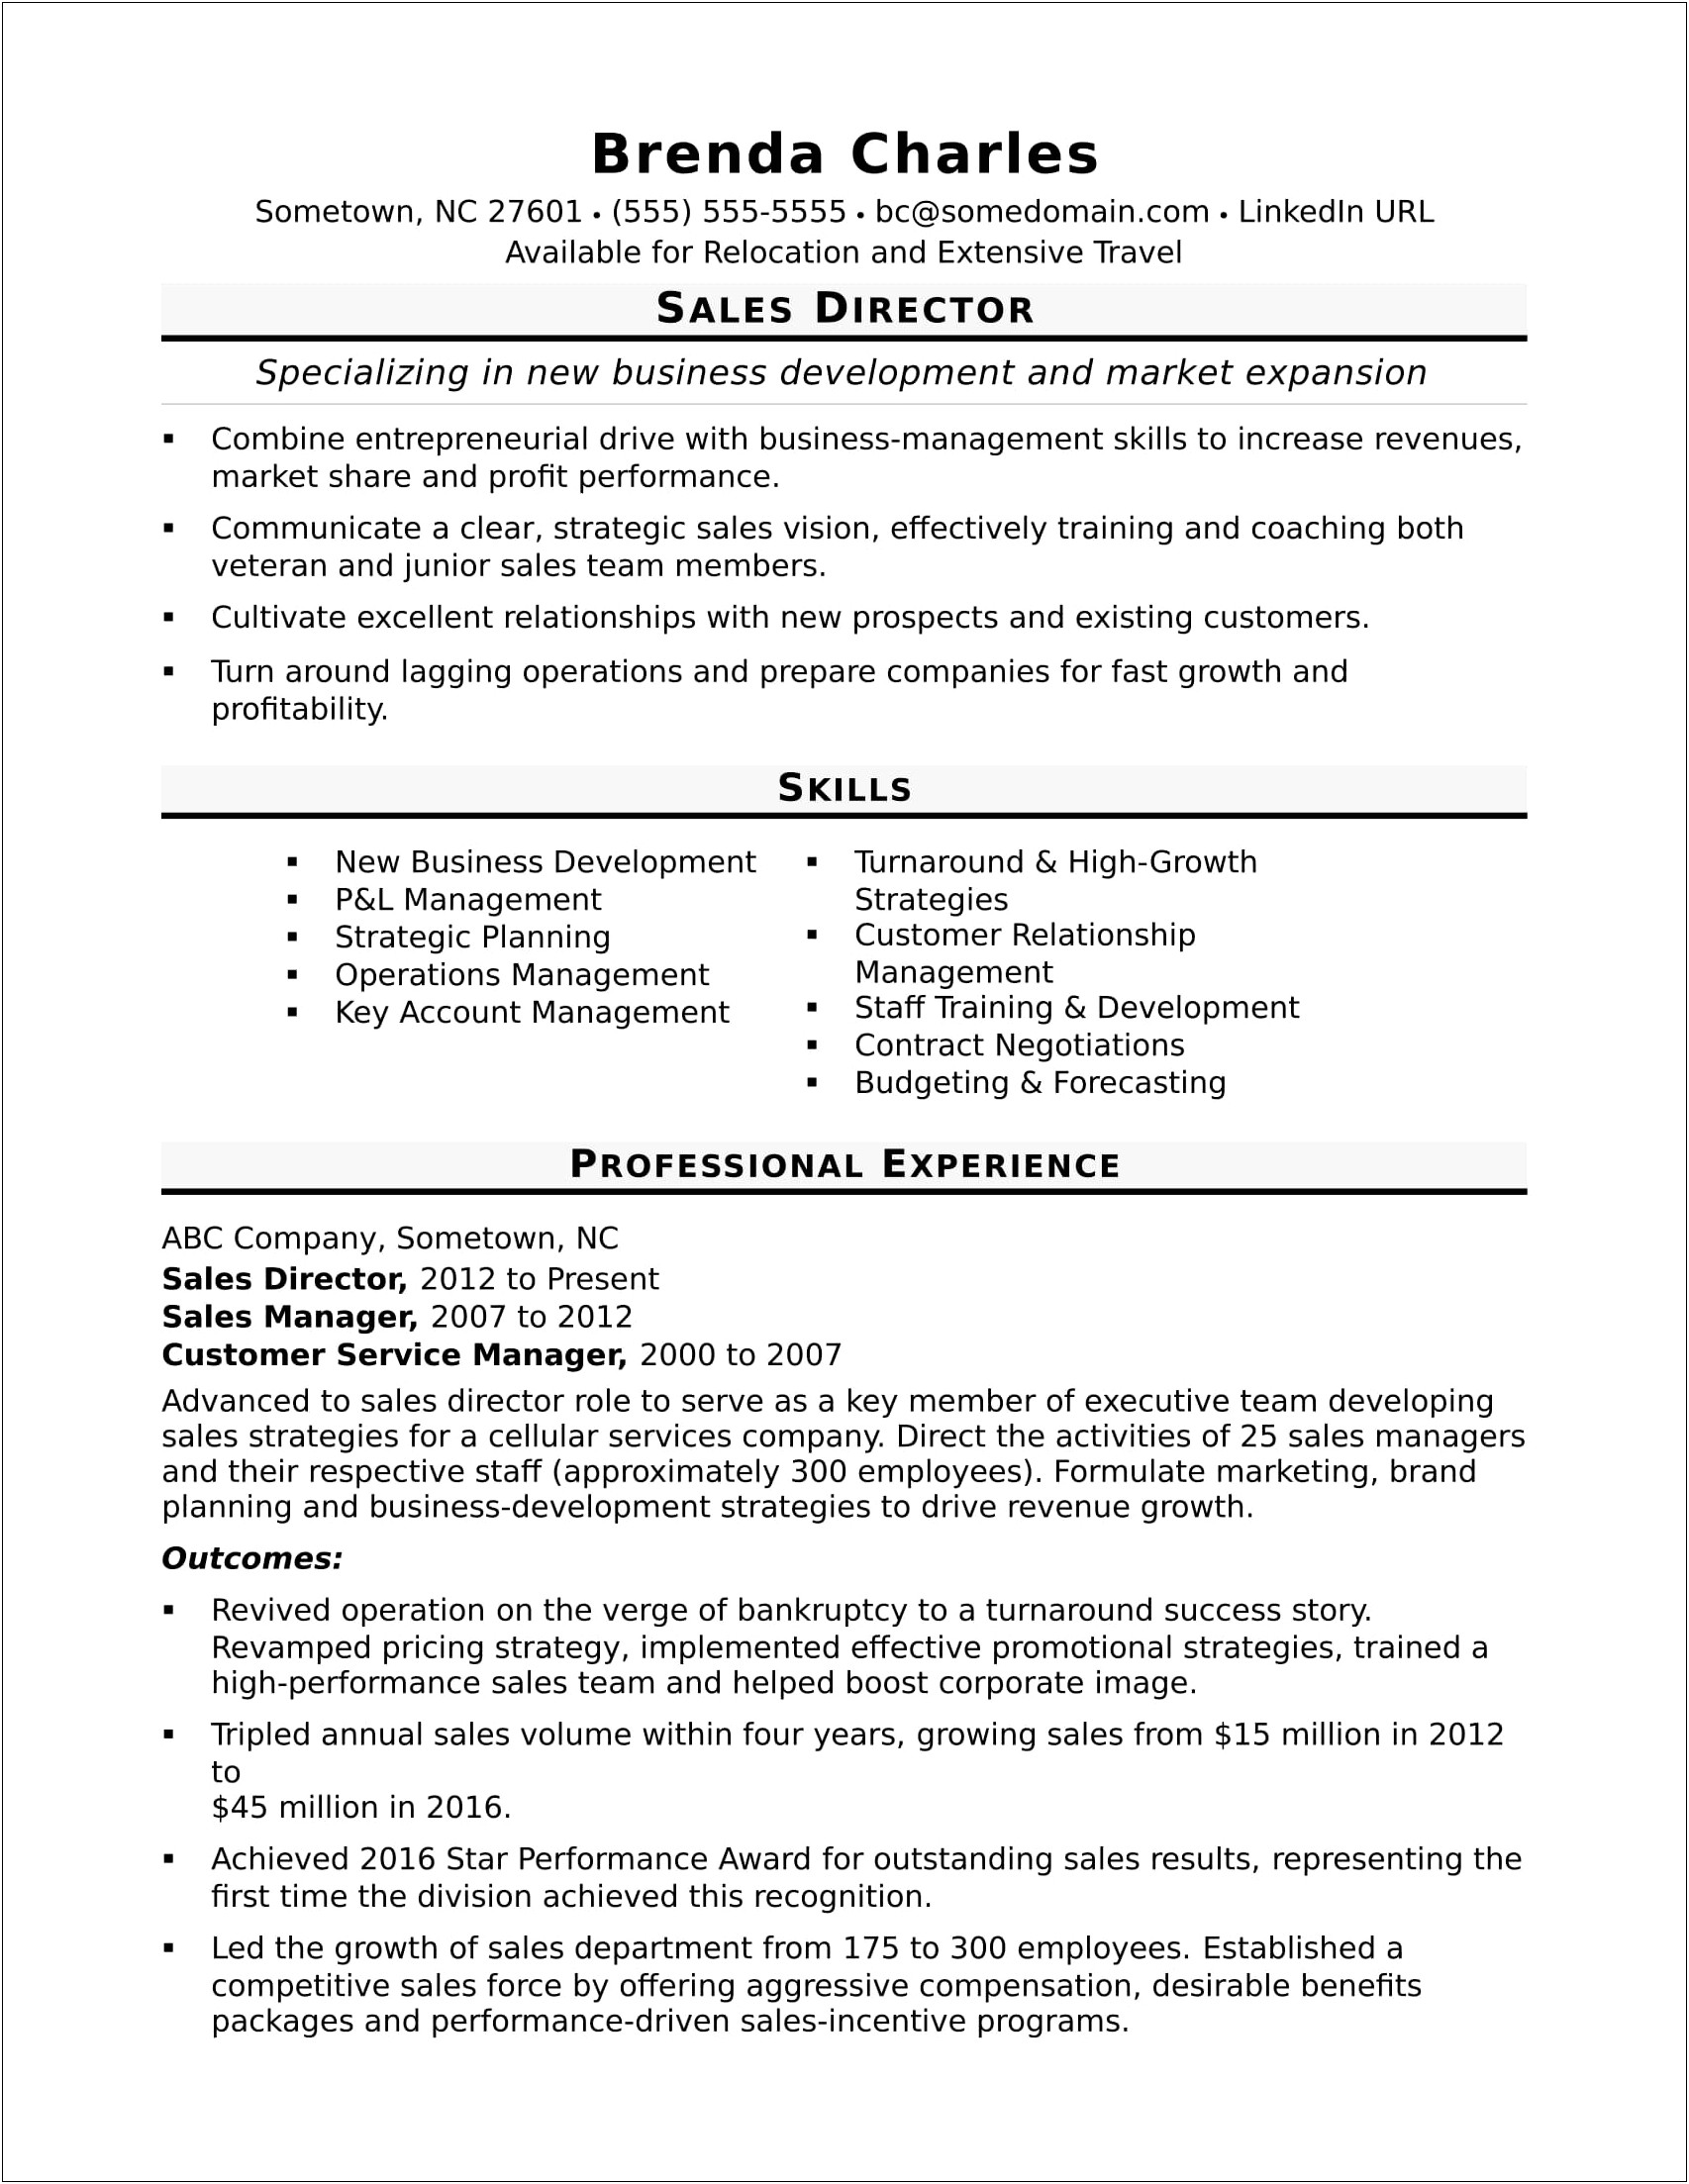 Resume Objective Regional Sales Manager